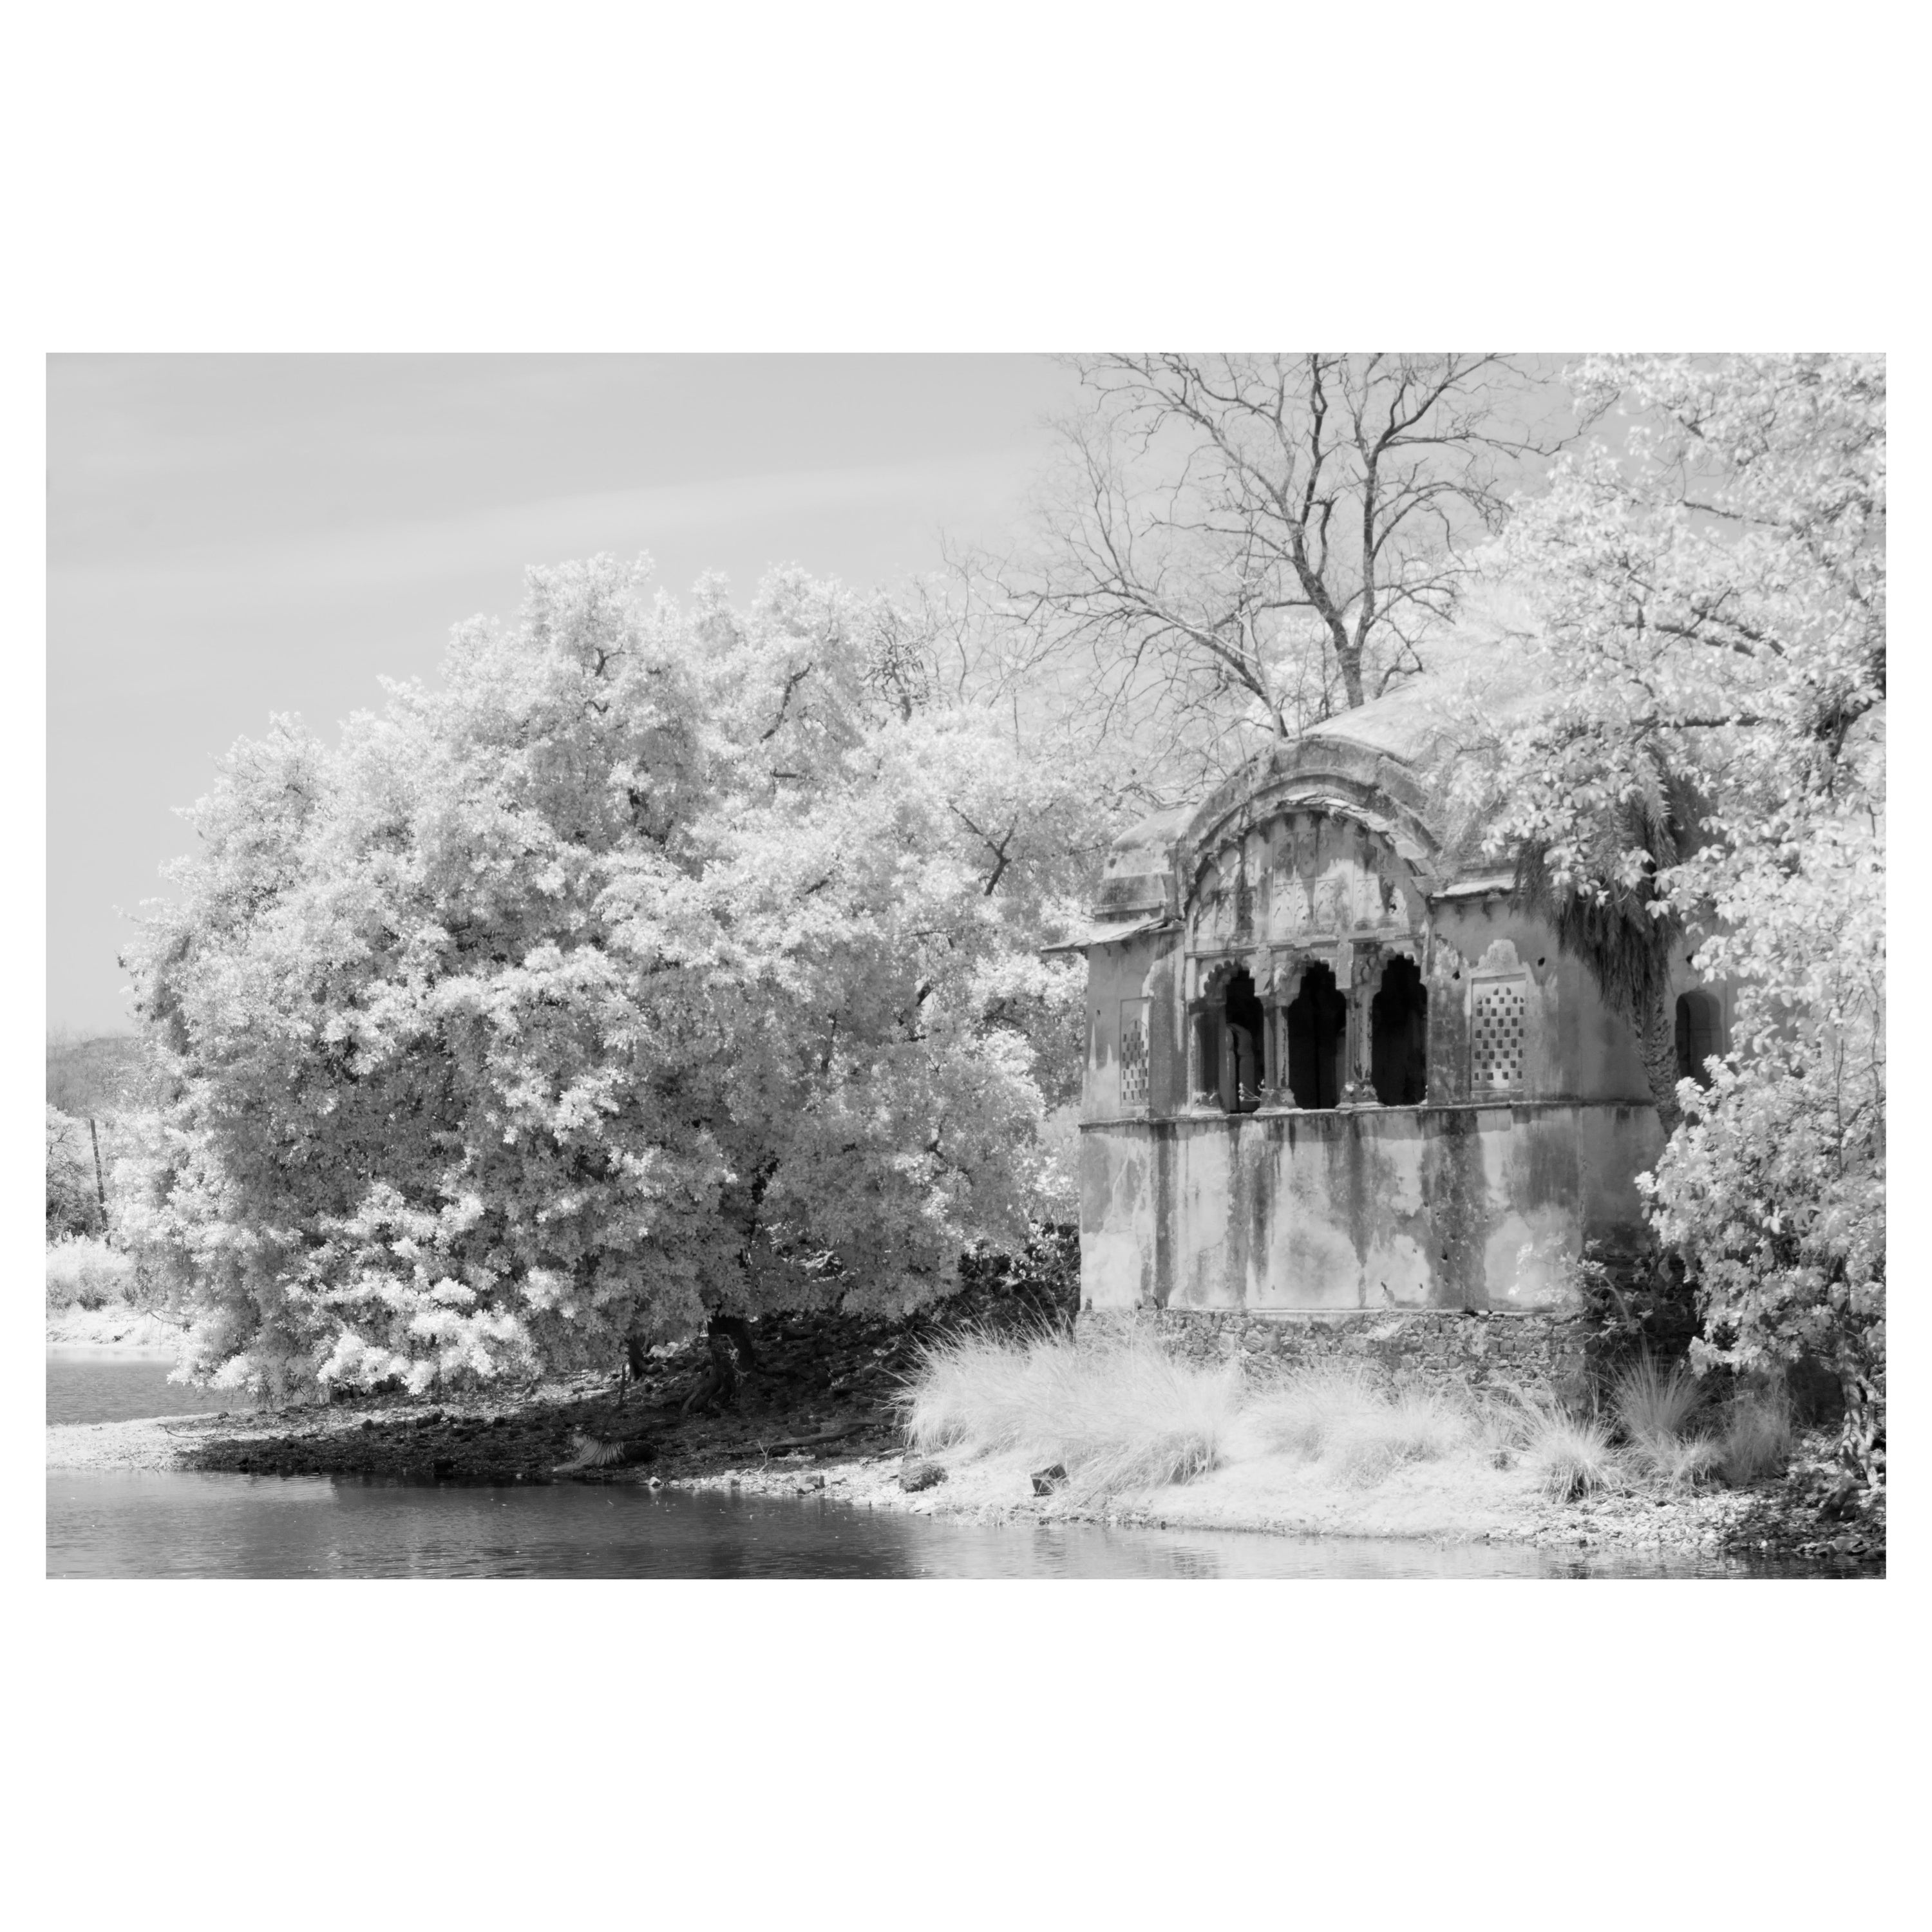 Aditya Dicky Singh Black and White Photograph - Landscape Photograph Nature Large Black White Infrared  India Tiger Lake Trees